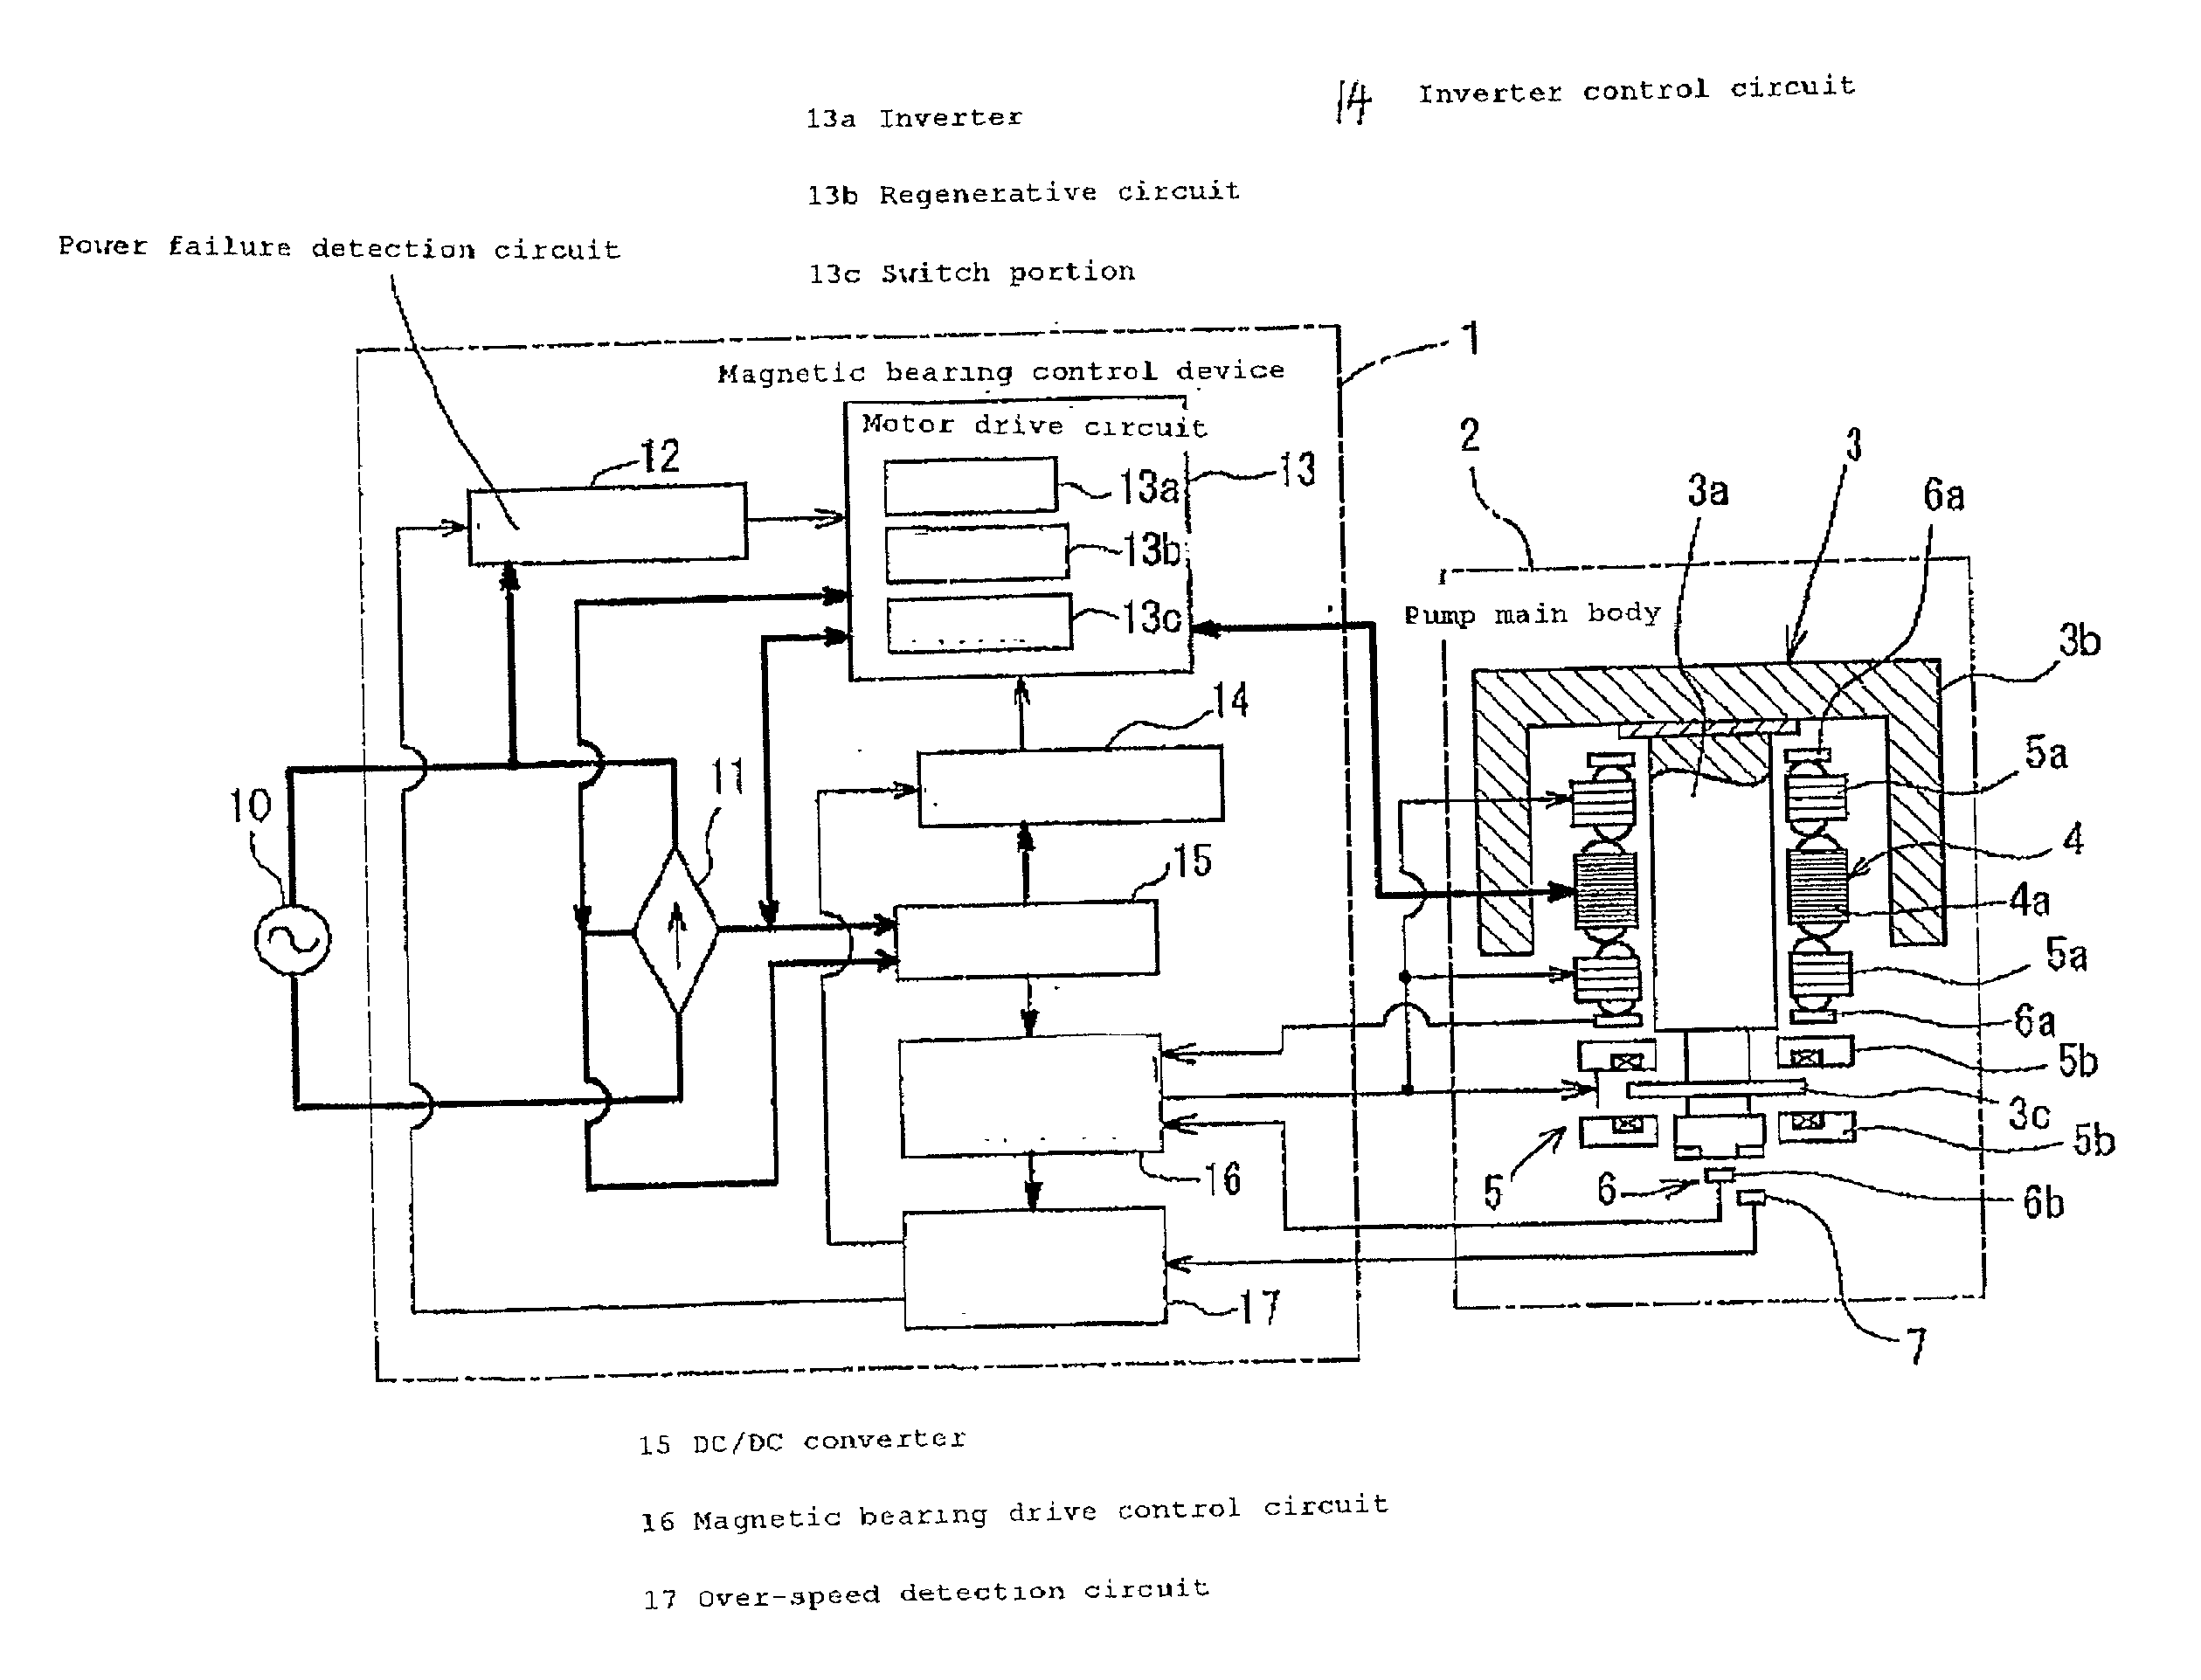 Magnetic bearing control device